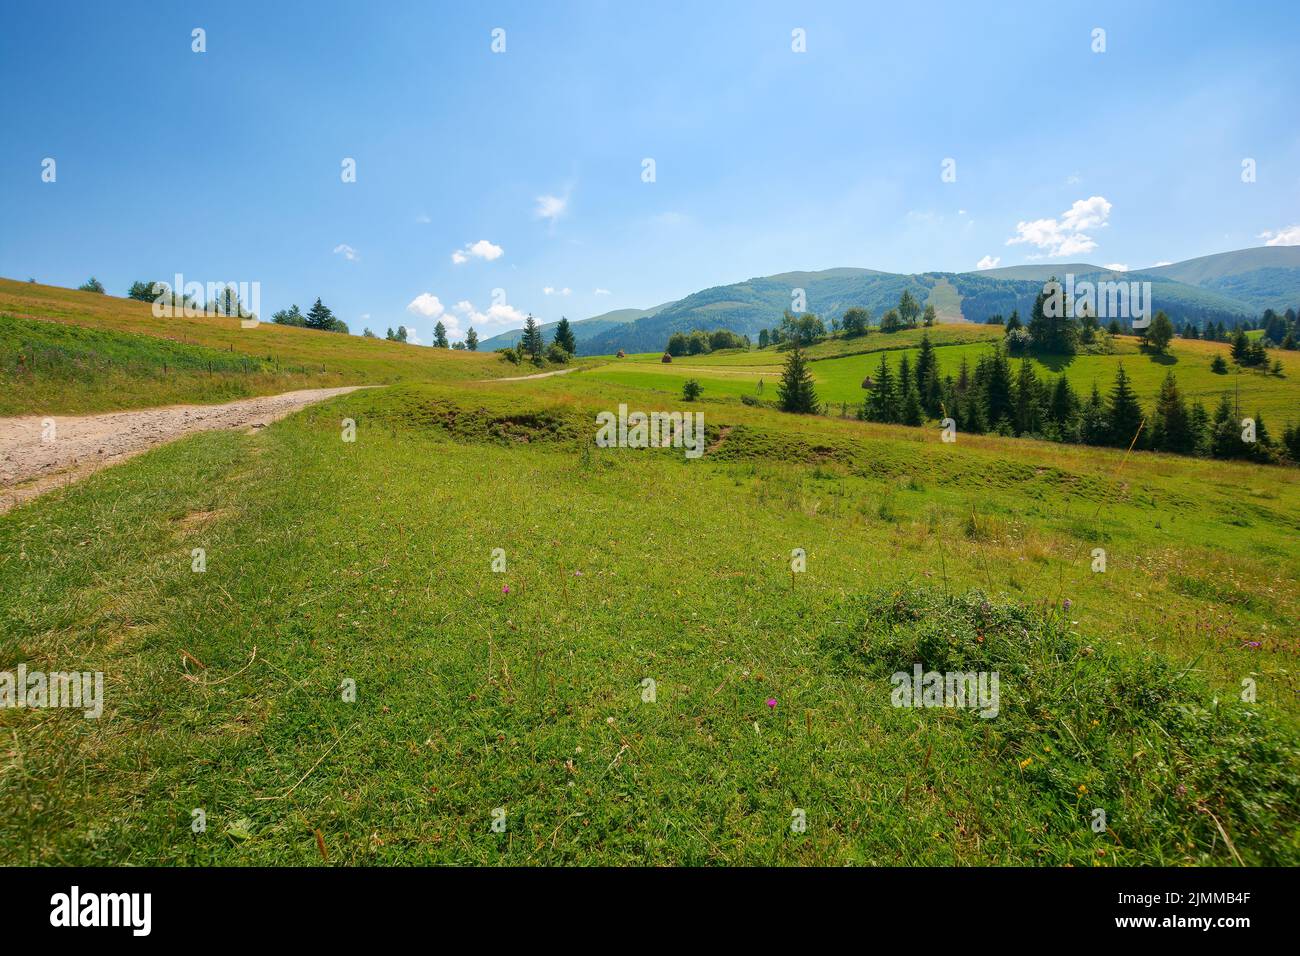 mountainous countryside landscape in summer. green rural scenery with grassy pastures and forested hills. wonderful sunny weather with blue sky Stock Photo